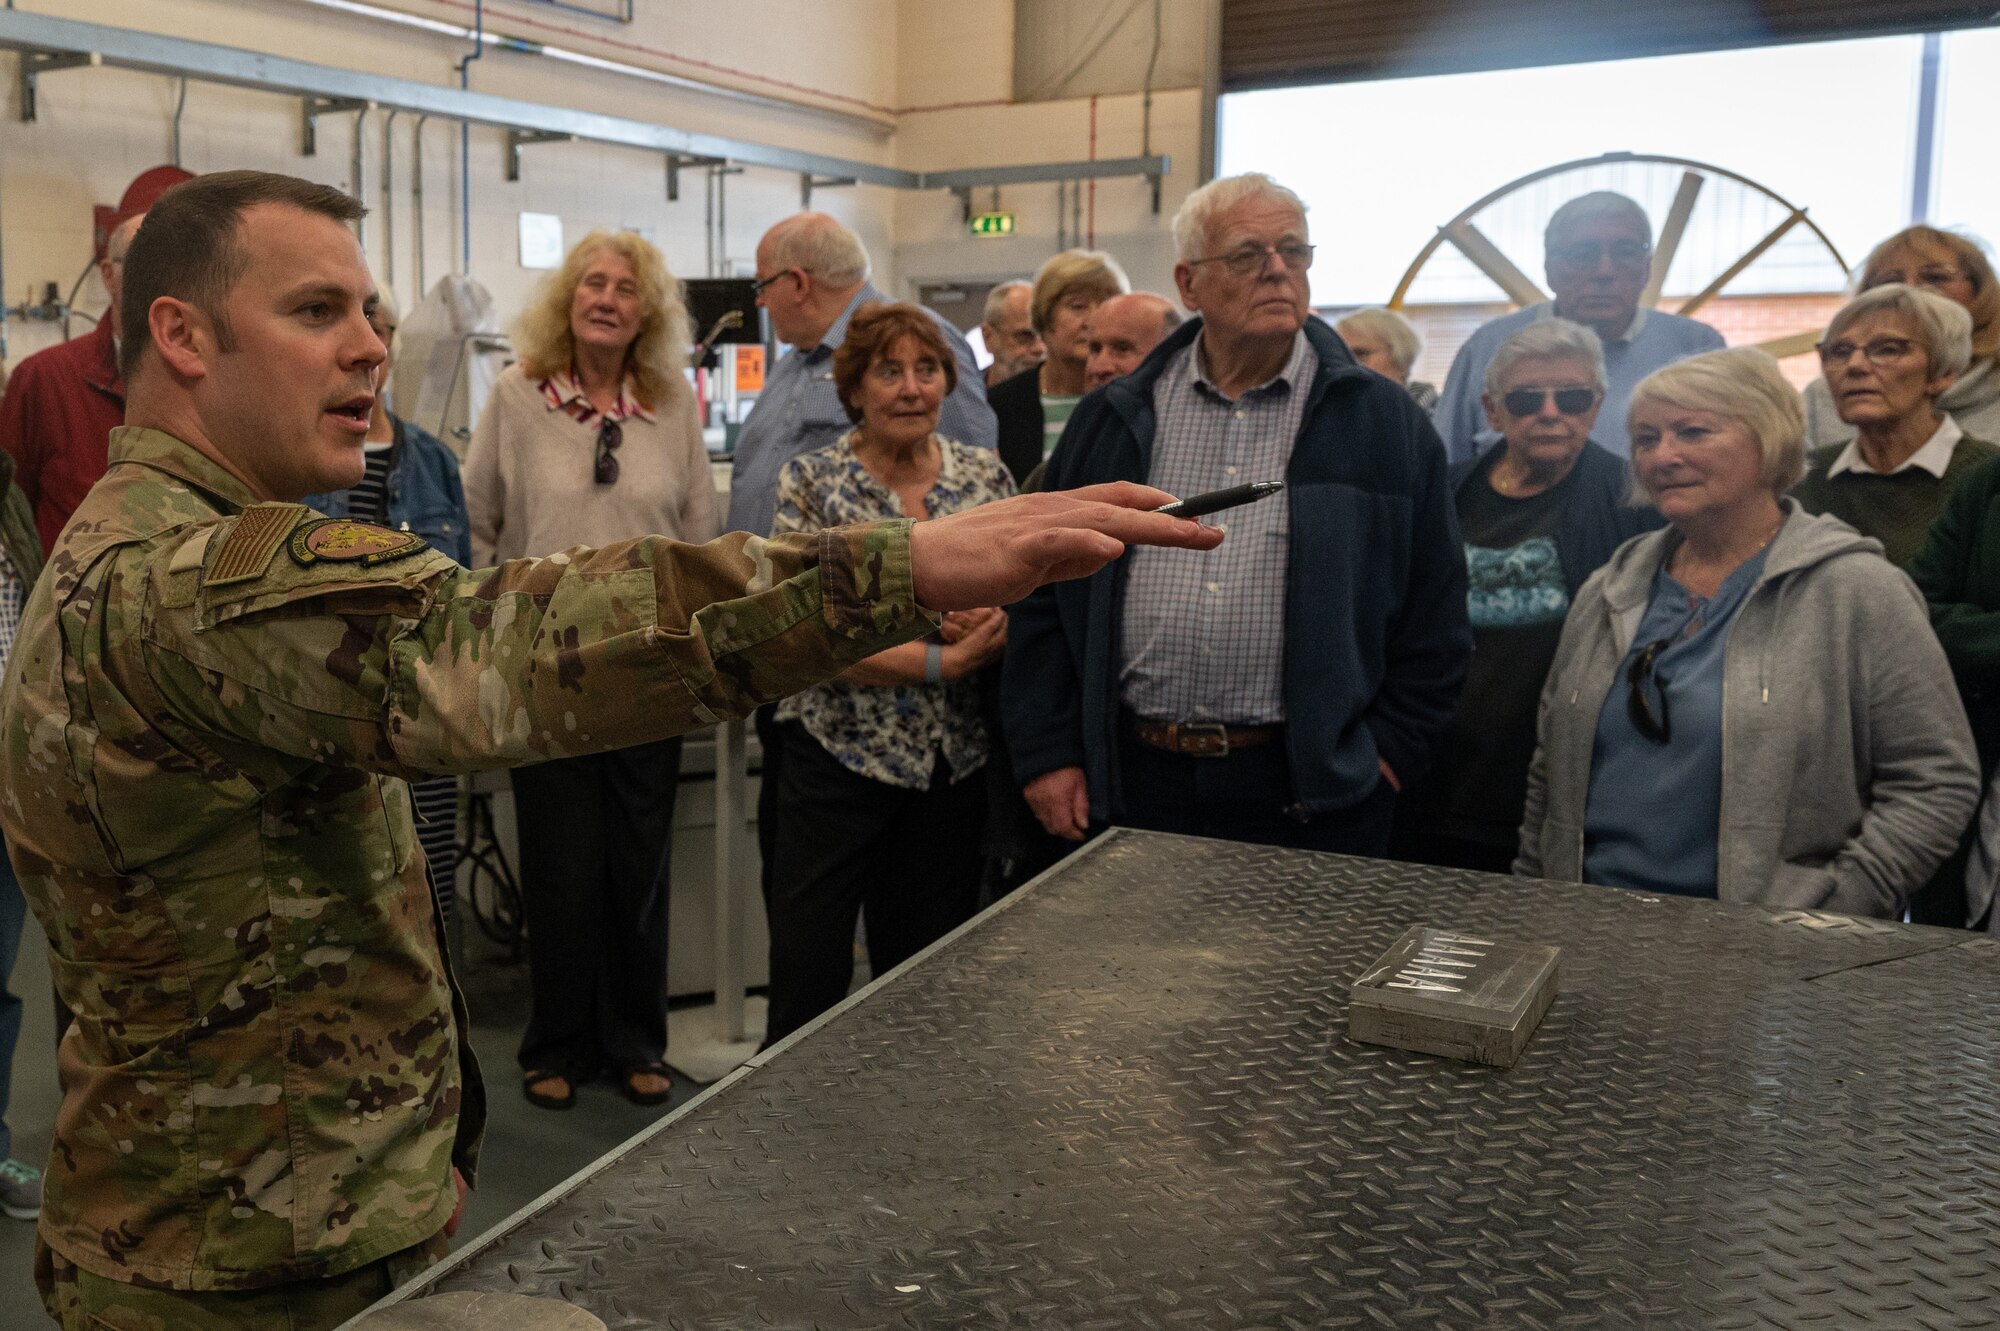 U.S. Air Force Tech. Sgt. Logan Portell, 100th Maintenance Squadron aircraft metals section chief, demonstrates how replacement KC-135 Stratotanker aircraft parts are made during a base tour at Royal Air Force Mildenhall, England, May 16, 2023.